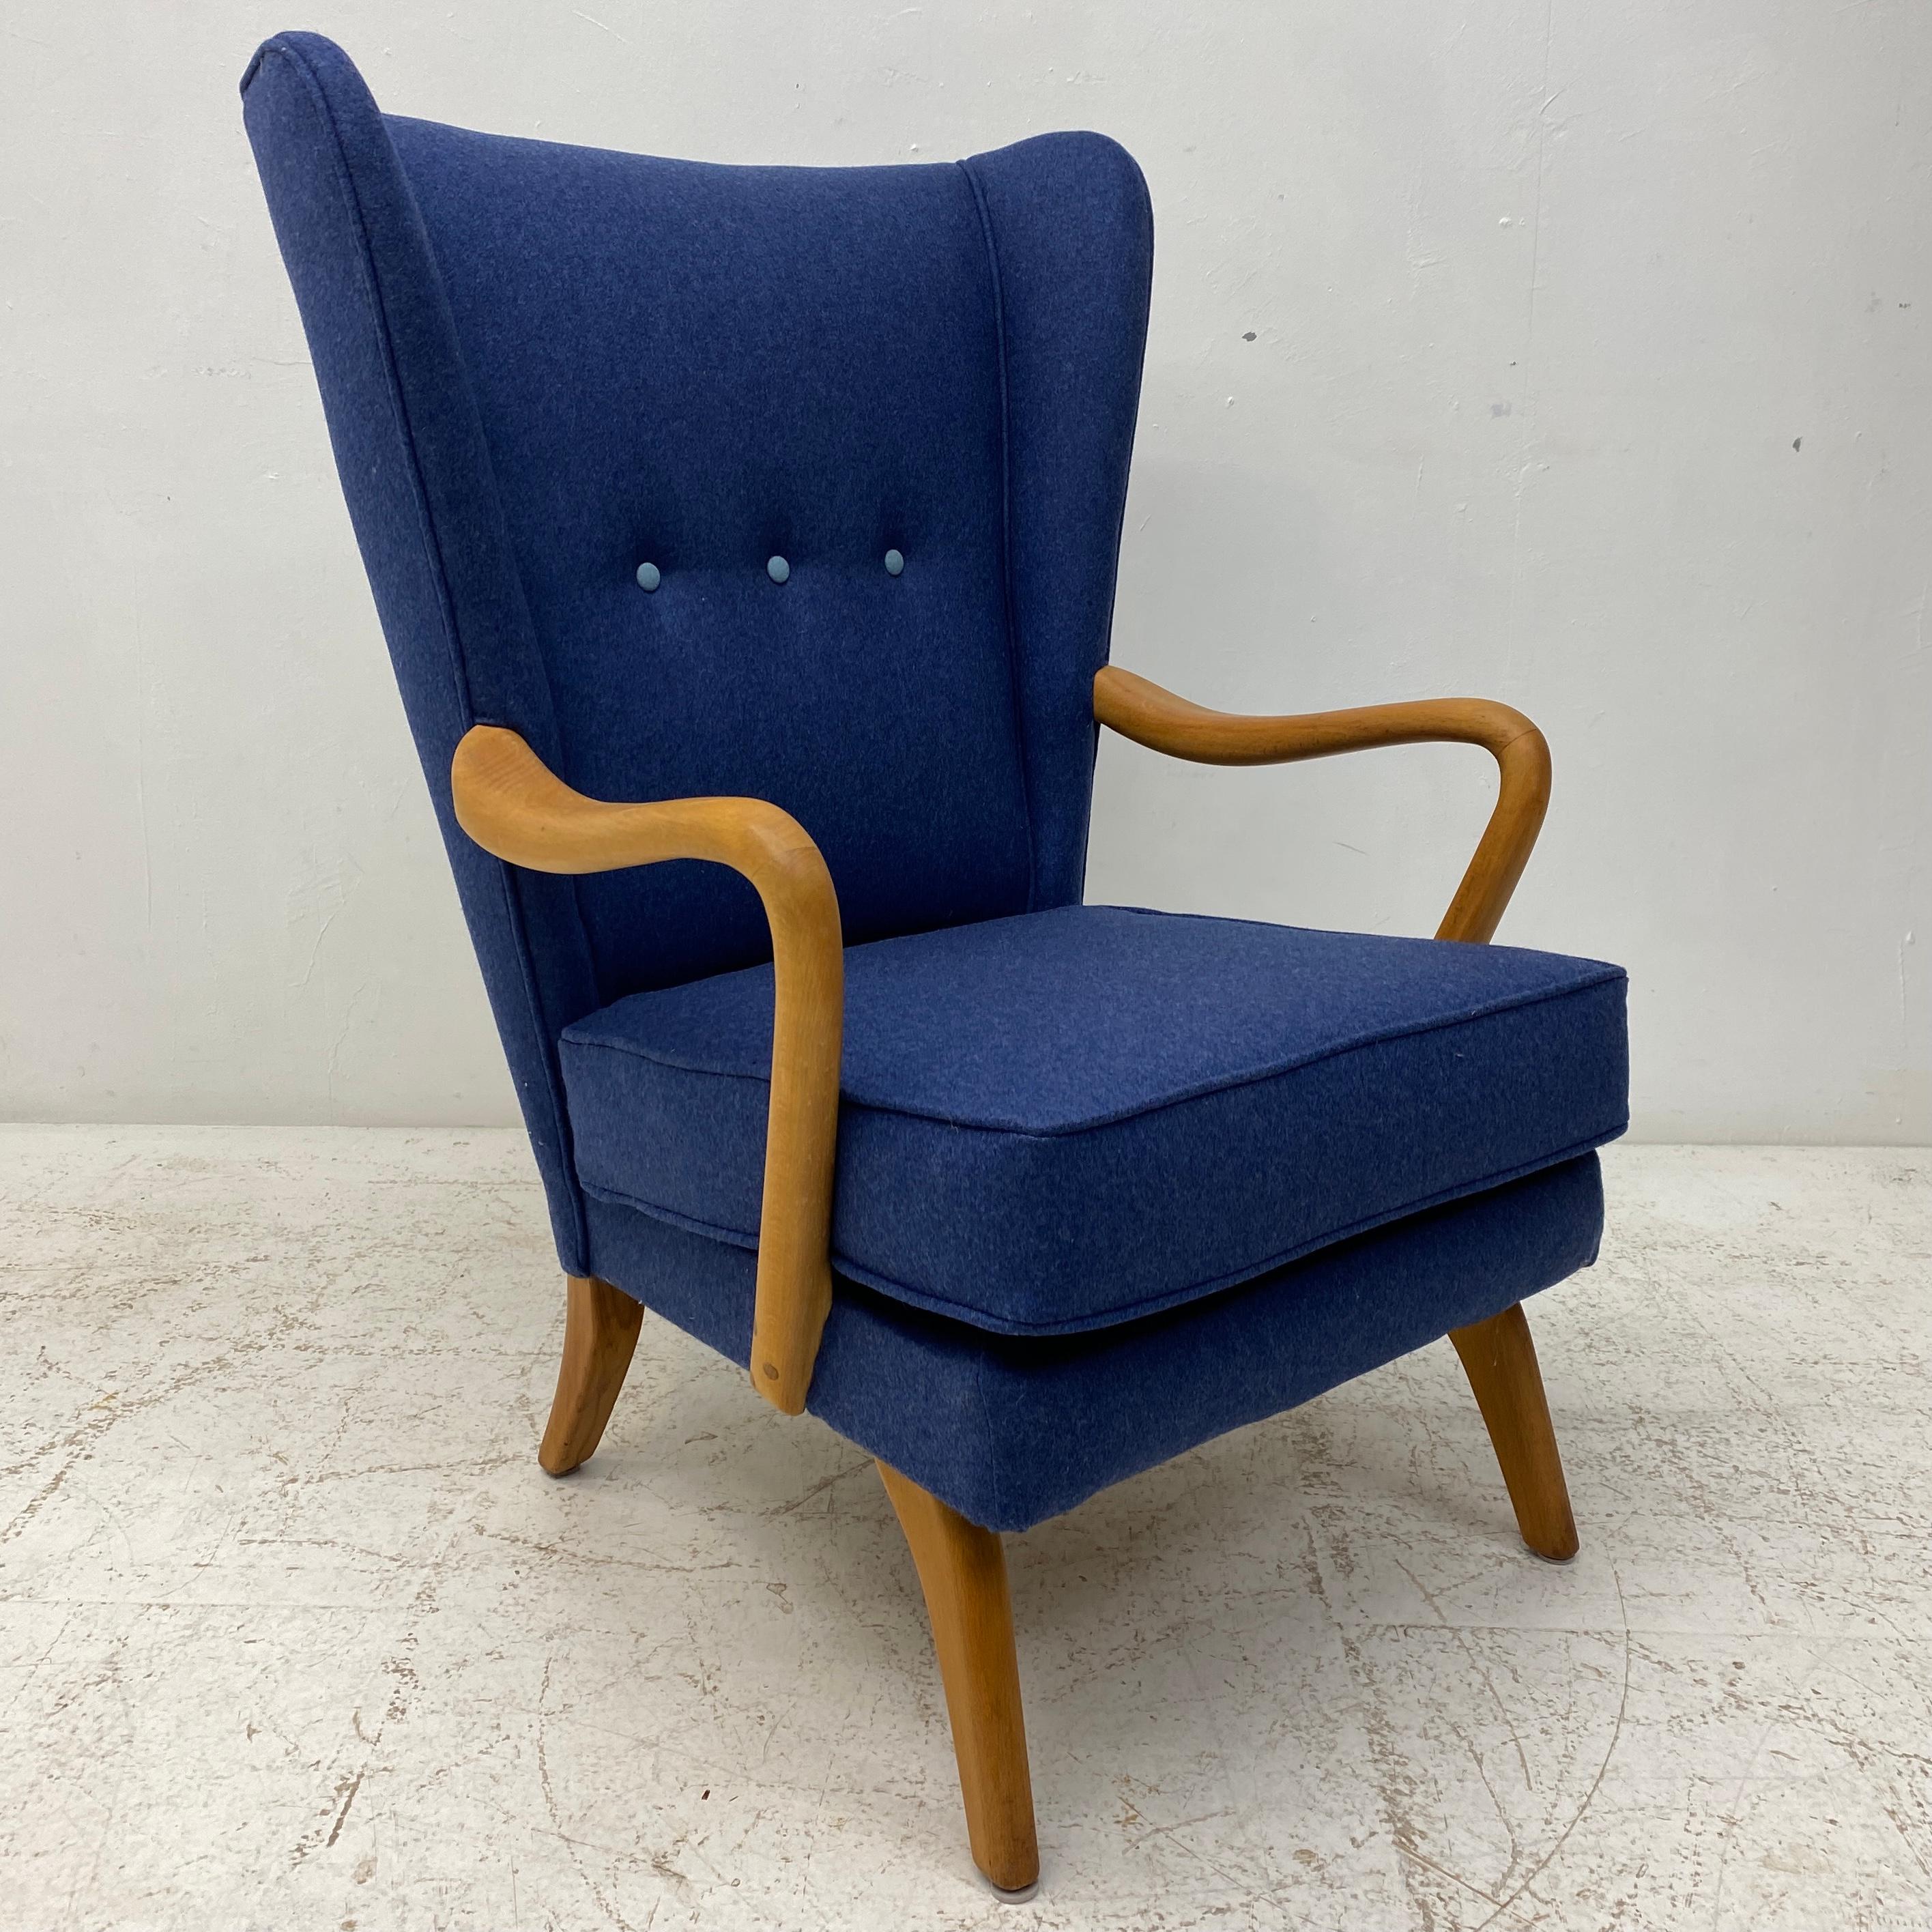 This Howard Keith “Bambino” armchair is a piece of history from the British midcentury company, HK Furniture. Howard Keith was among the British designers to pioneer the use of new materials and manufacturing techniques, whilst maintaining links